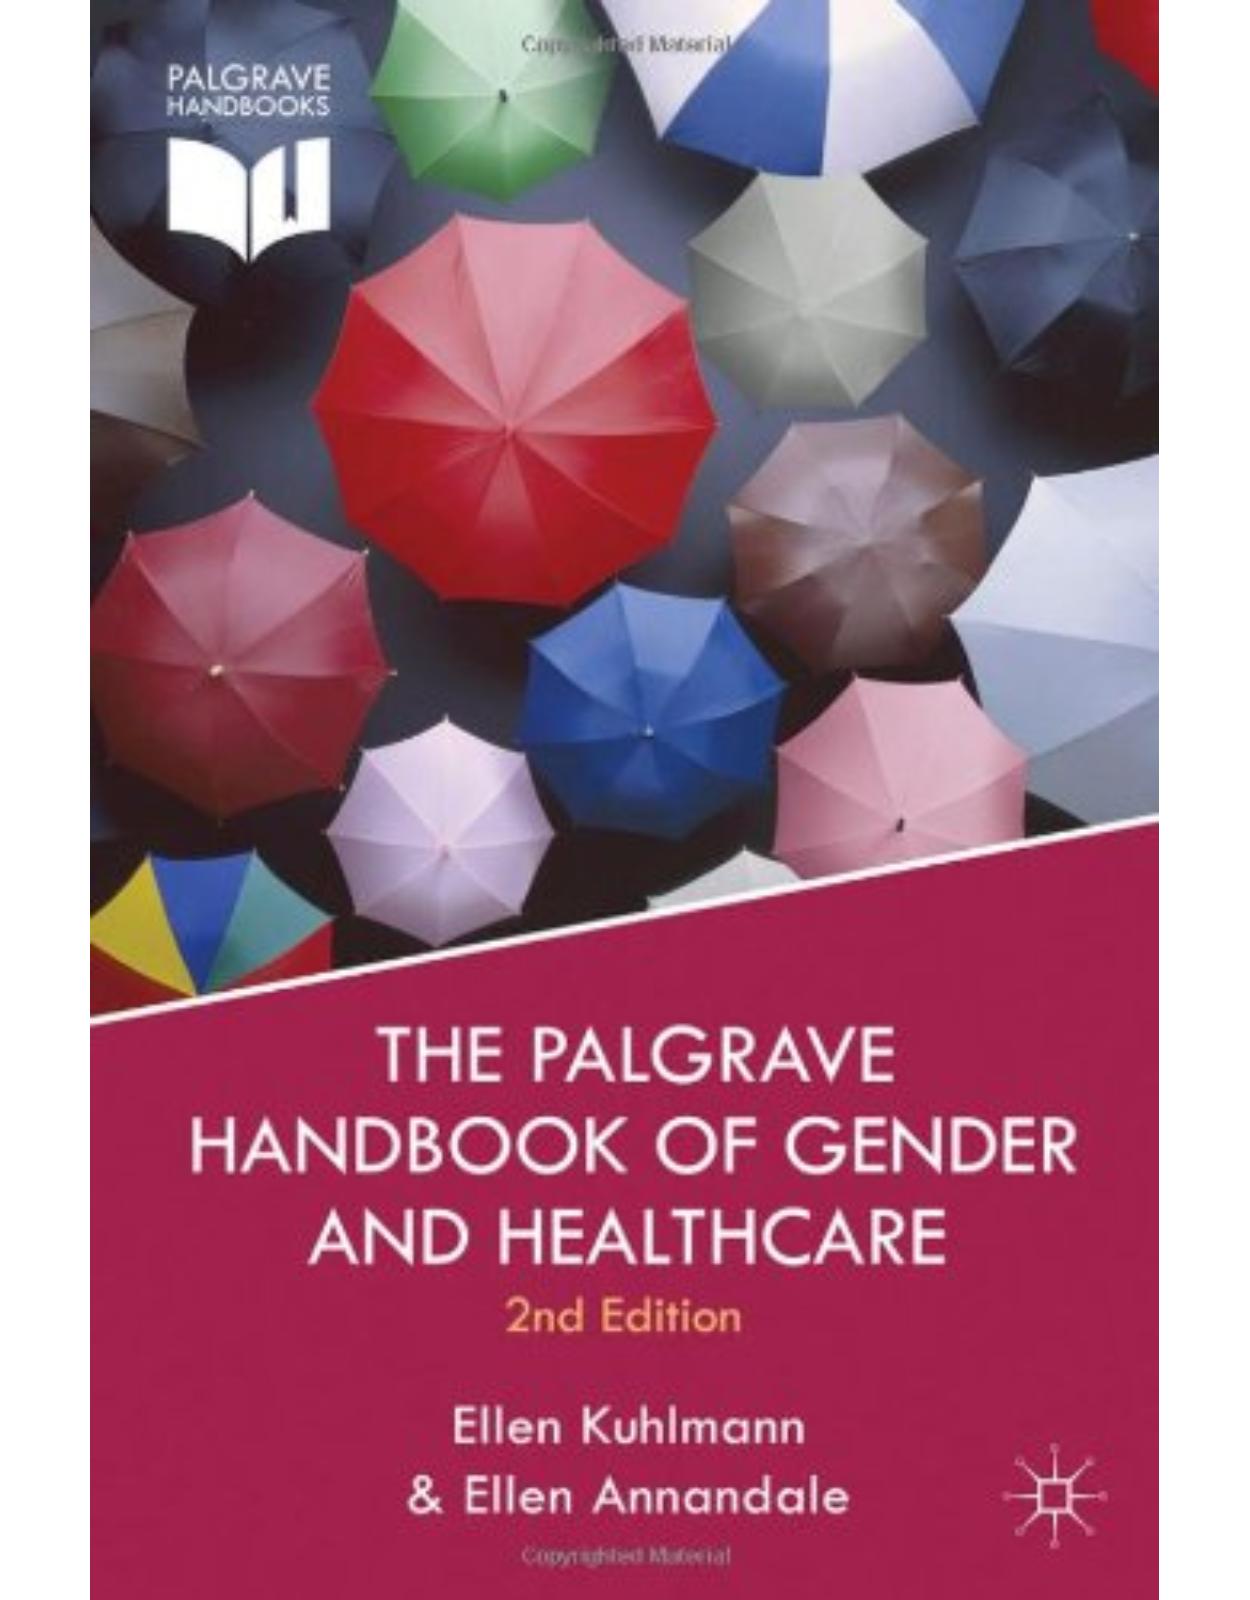 The Palgrave Handbook of Gender and Healthcare. Palgrave. 2012.